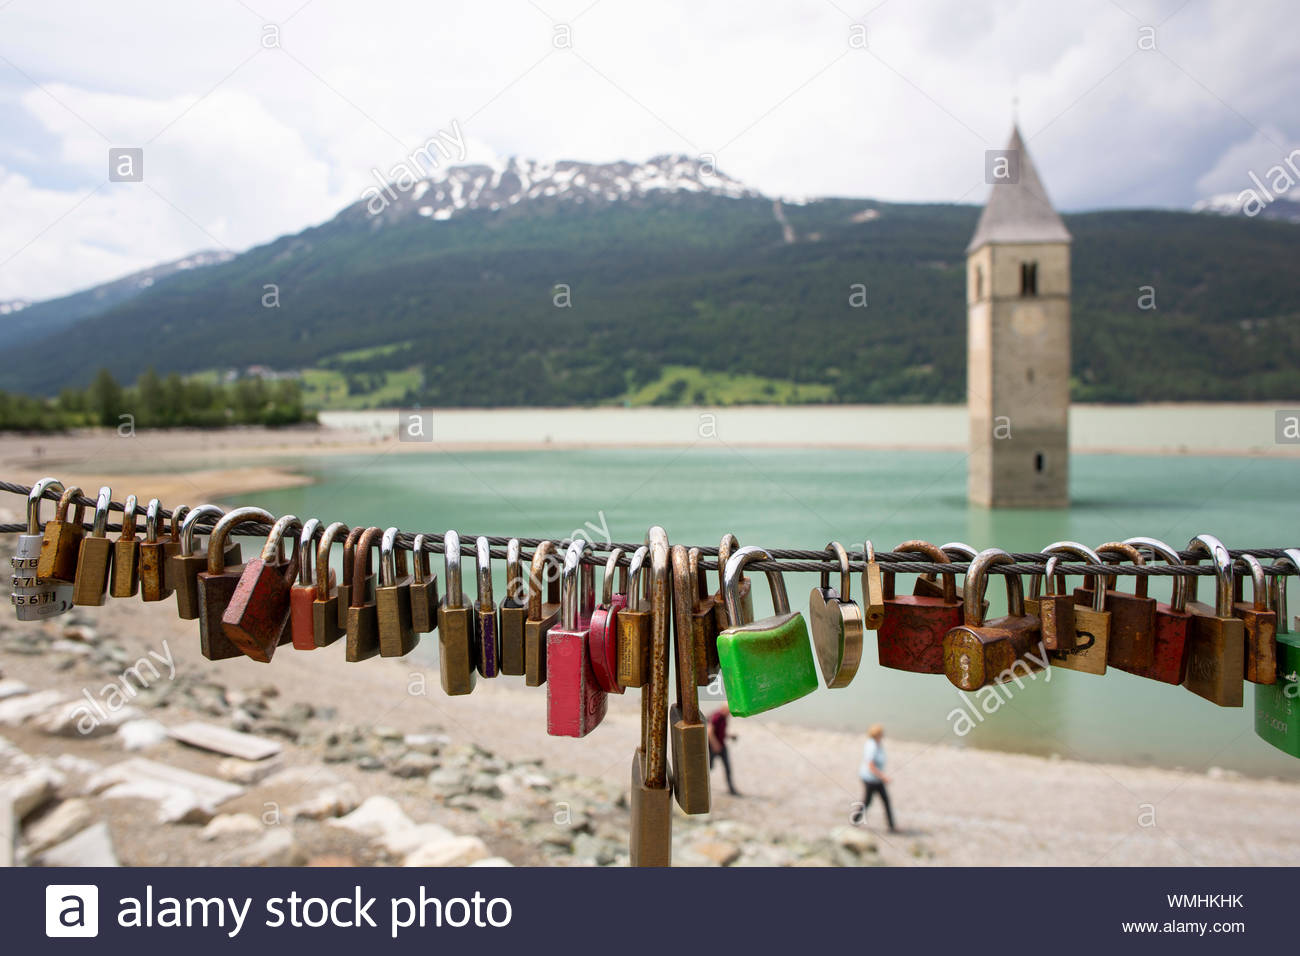 A shot of Lake Reschen in South Tyrol famous for the church belltower which is now all that can be seen of the town that once existed there Stock Photo